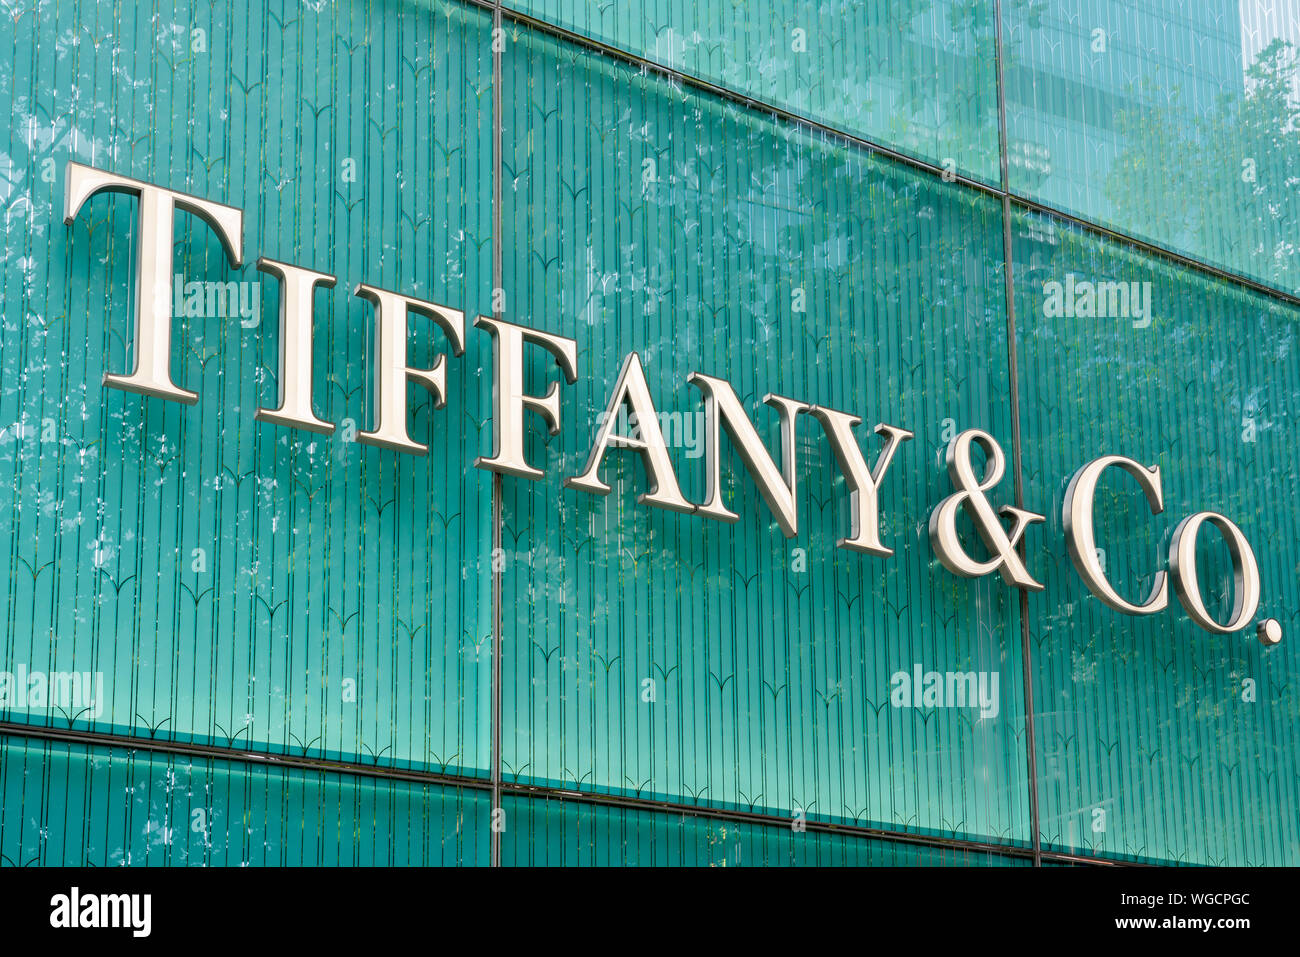 Tiffany co shop store logo hi-res stock photography and images - Alamy